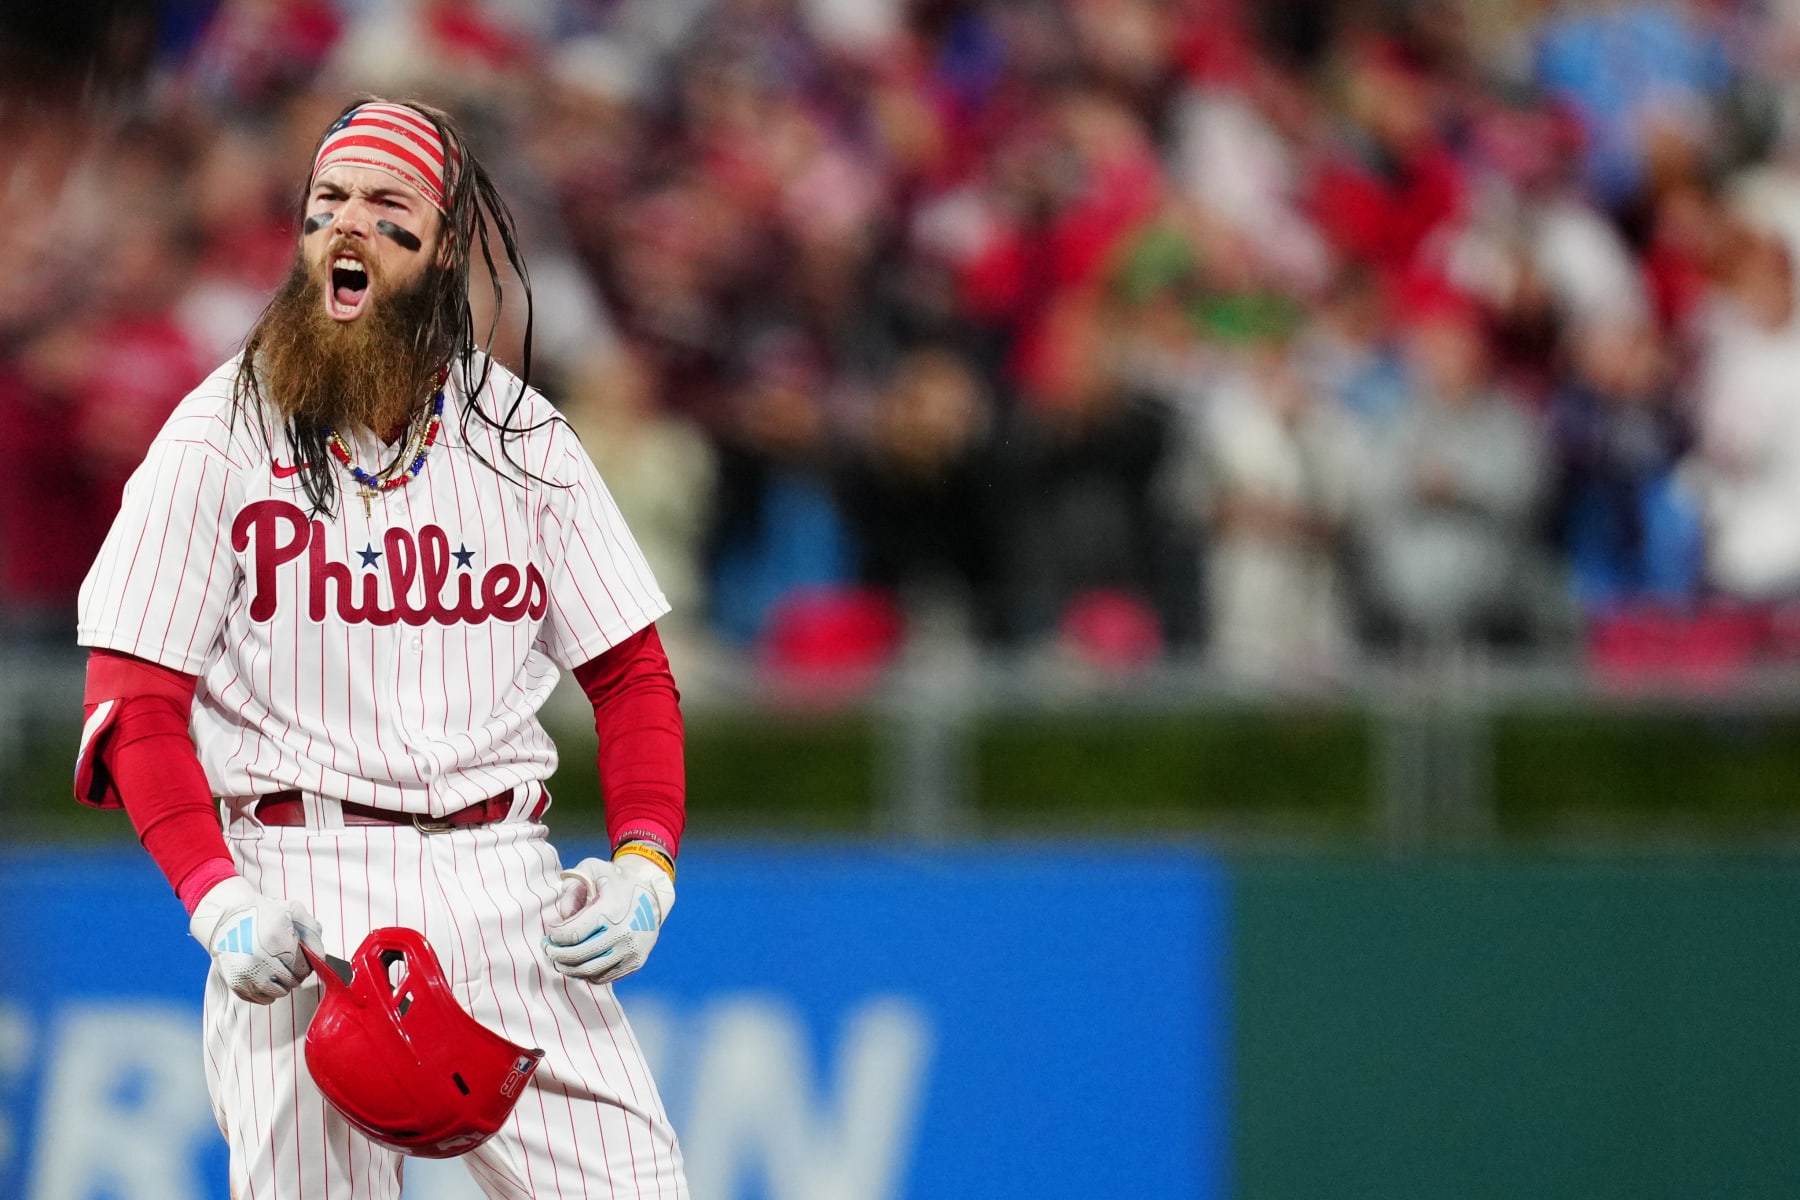 2023 World Series odds: Phillies not expected to return to Fall Classic